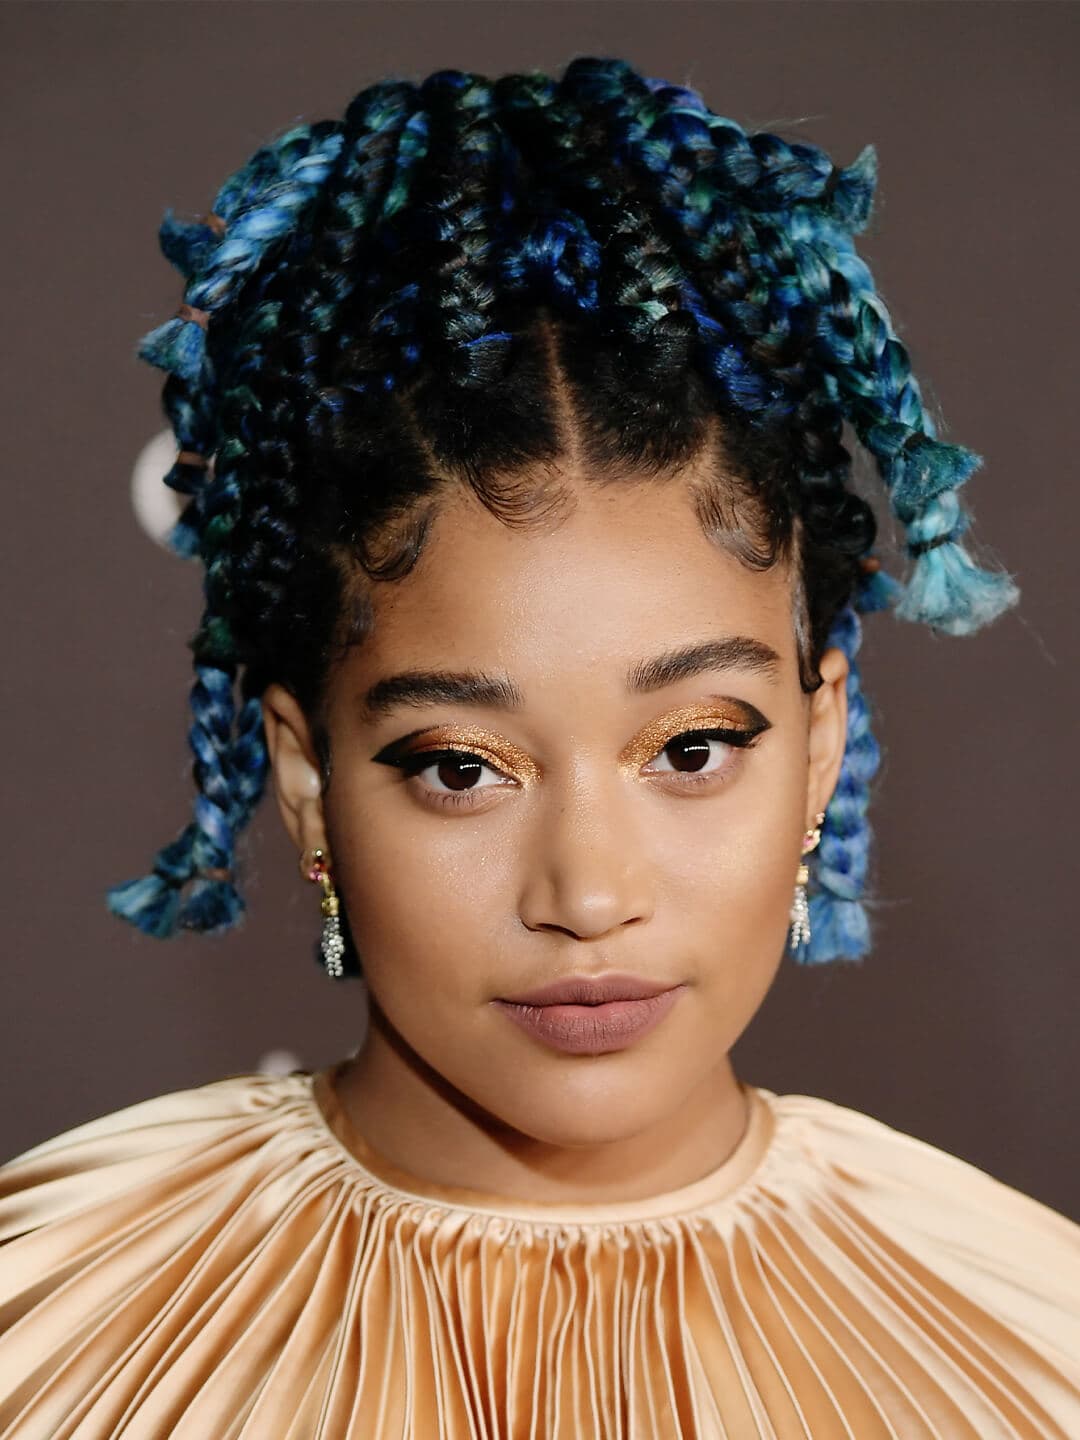 Amandla Stenberg in a gold, pleated dress rocking a black and gold eye makeup look and blue, braided high pony tail hairstyle